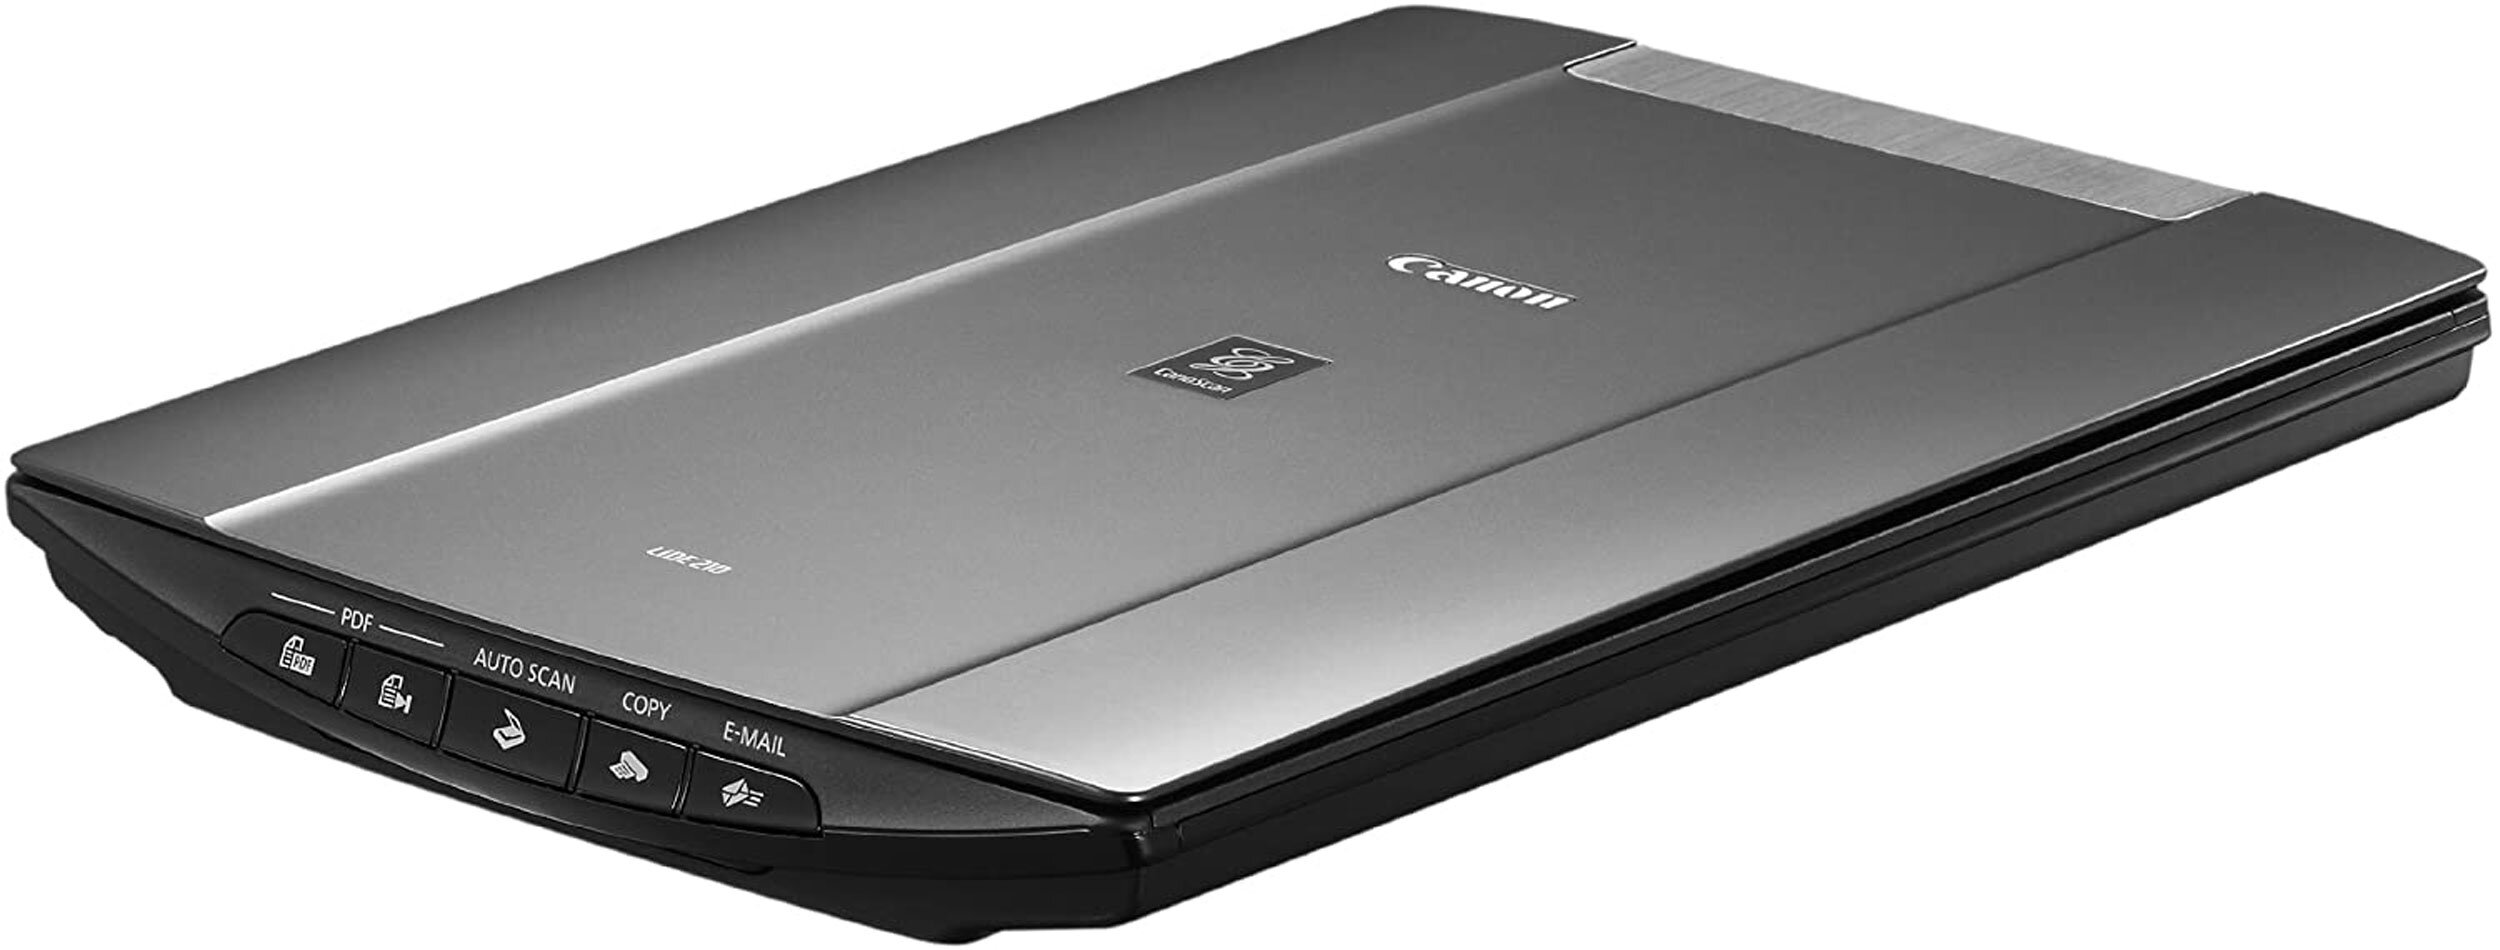 canon lide 210 scanner driver free download for windows 10